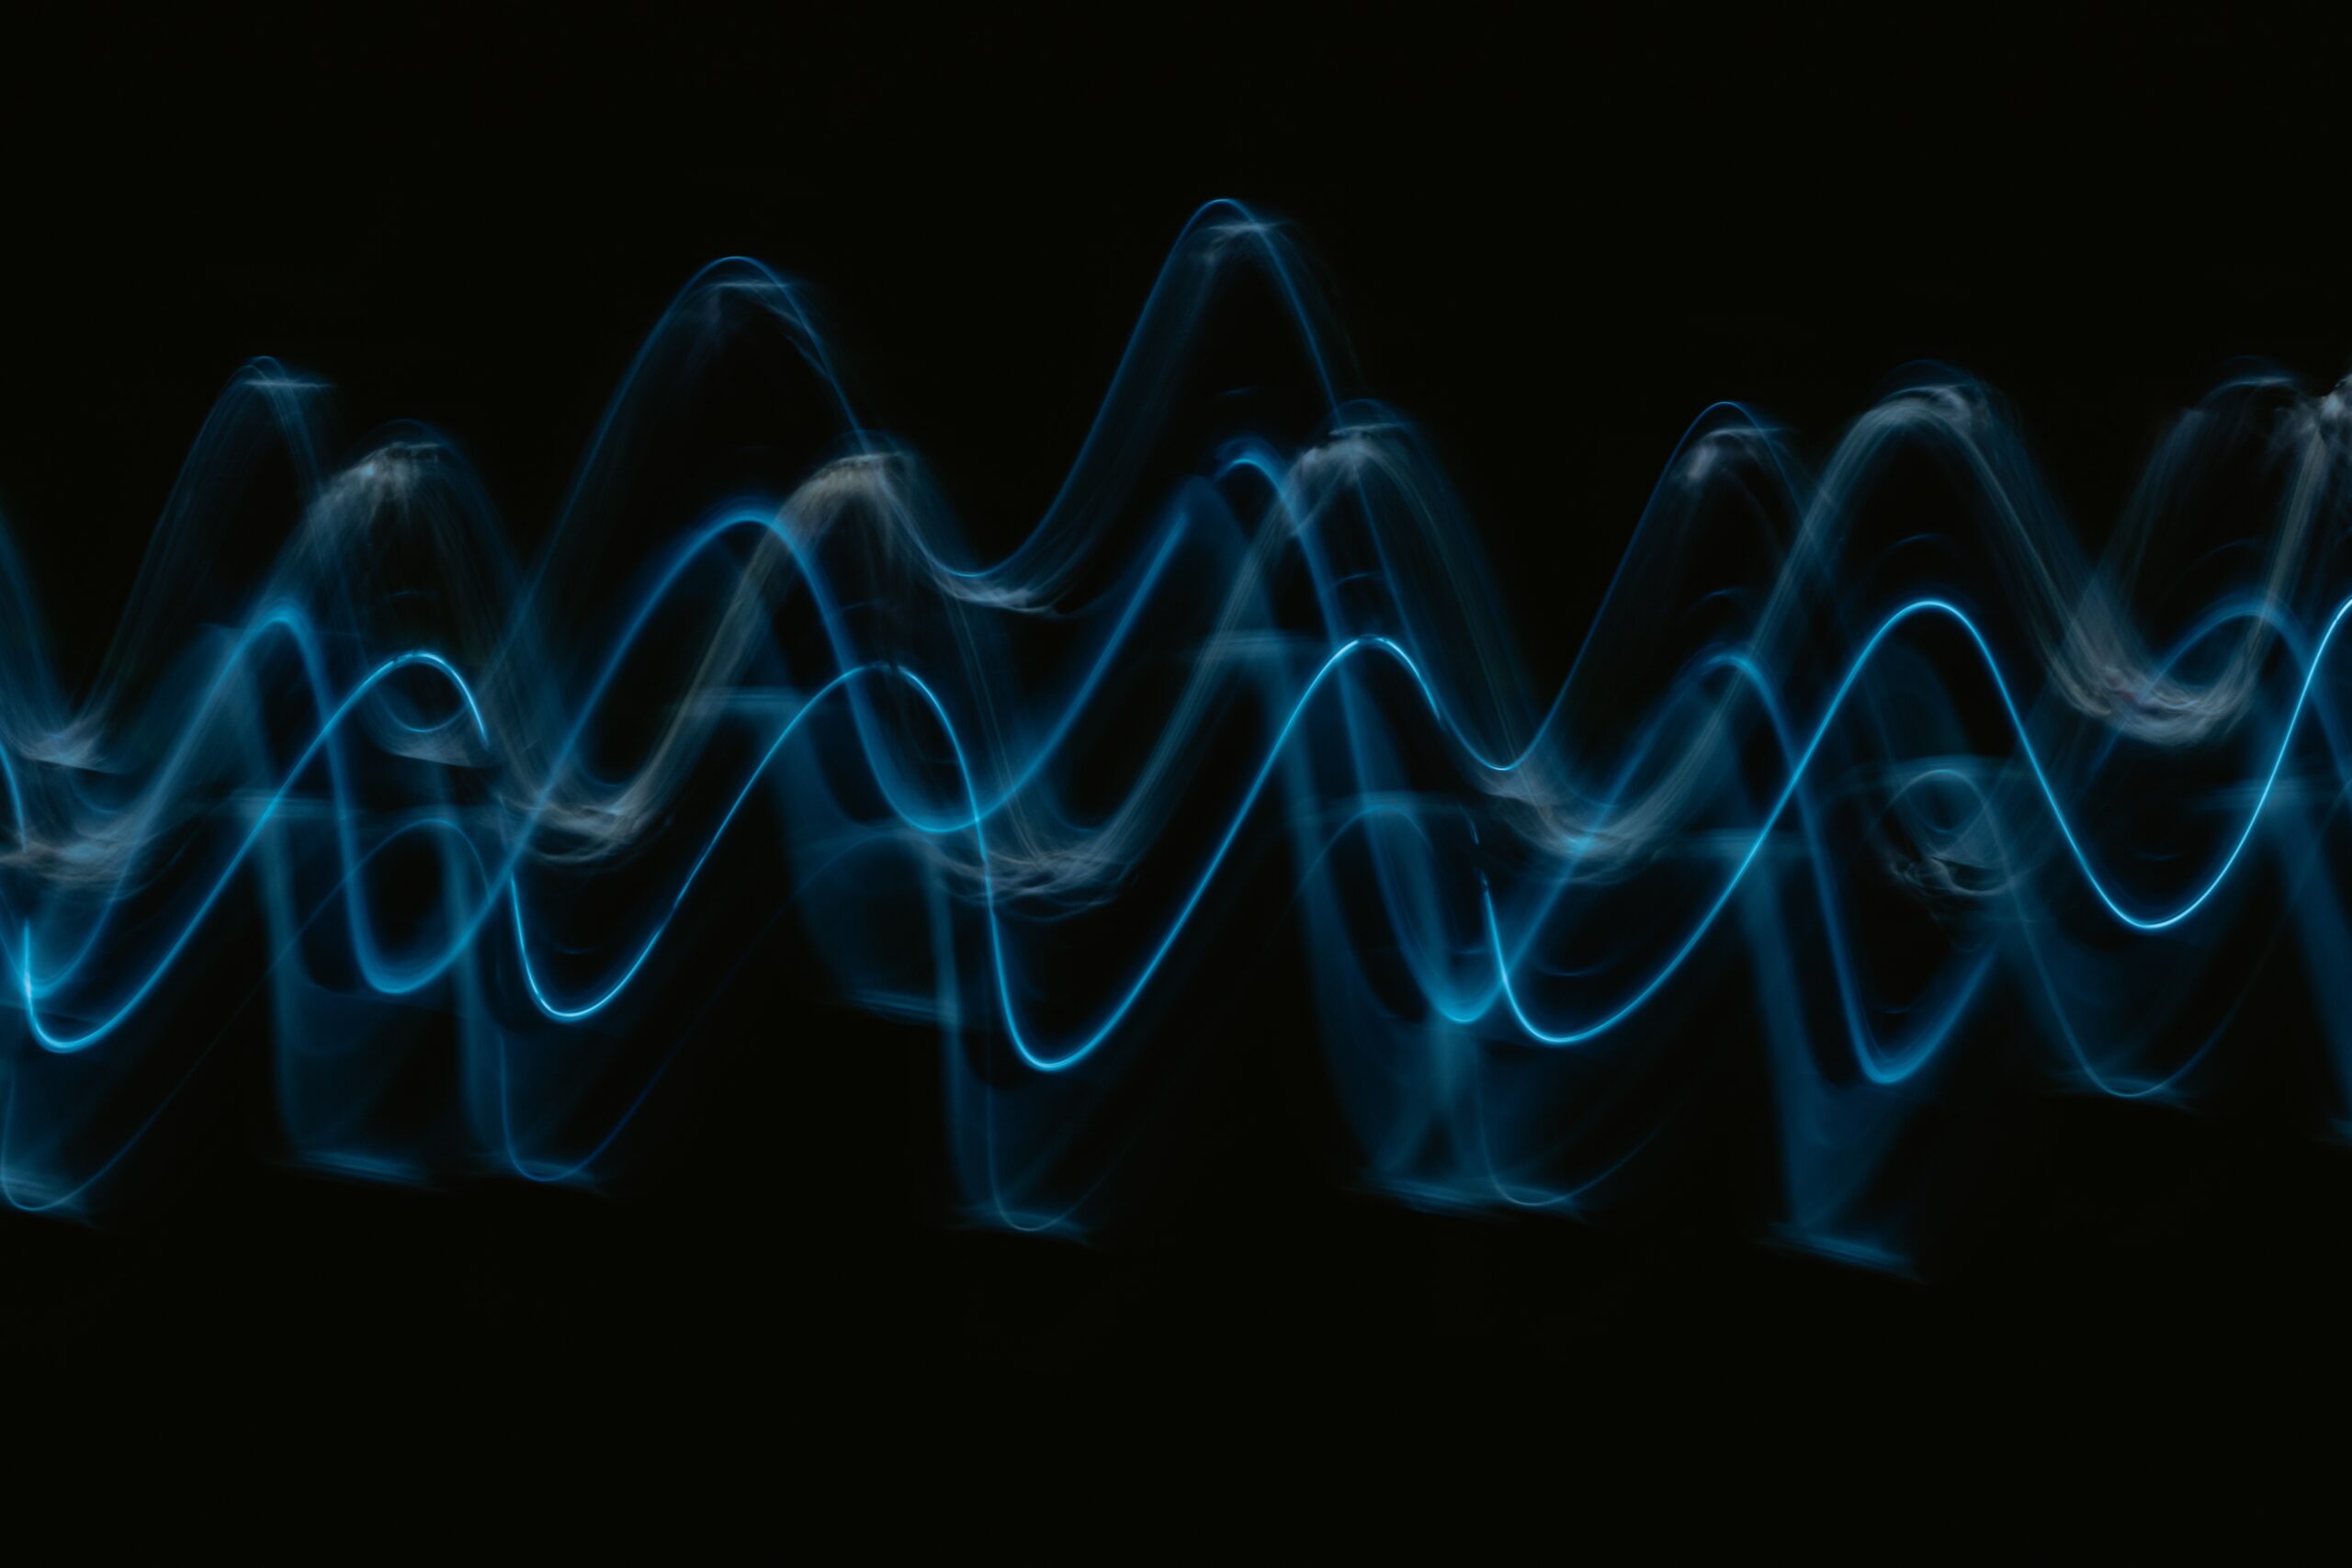 Abstract waves of blue light against a dark background.